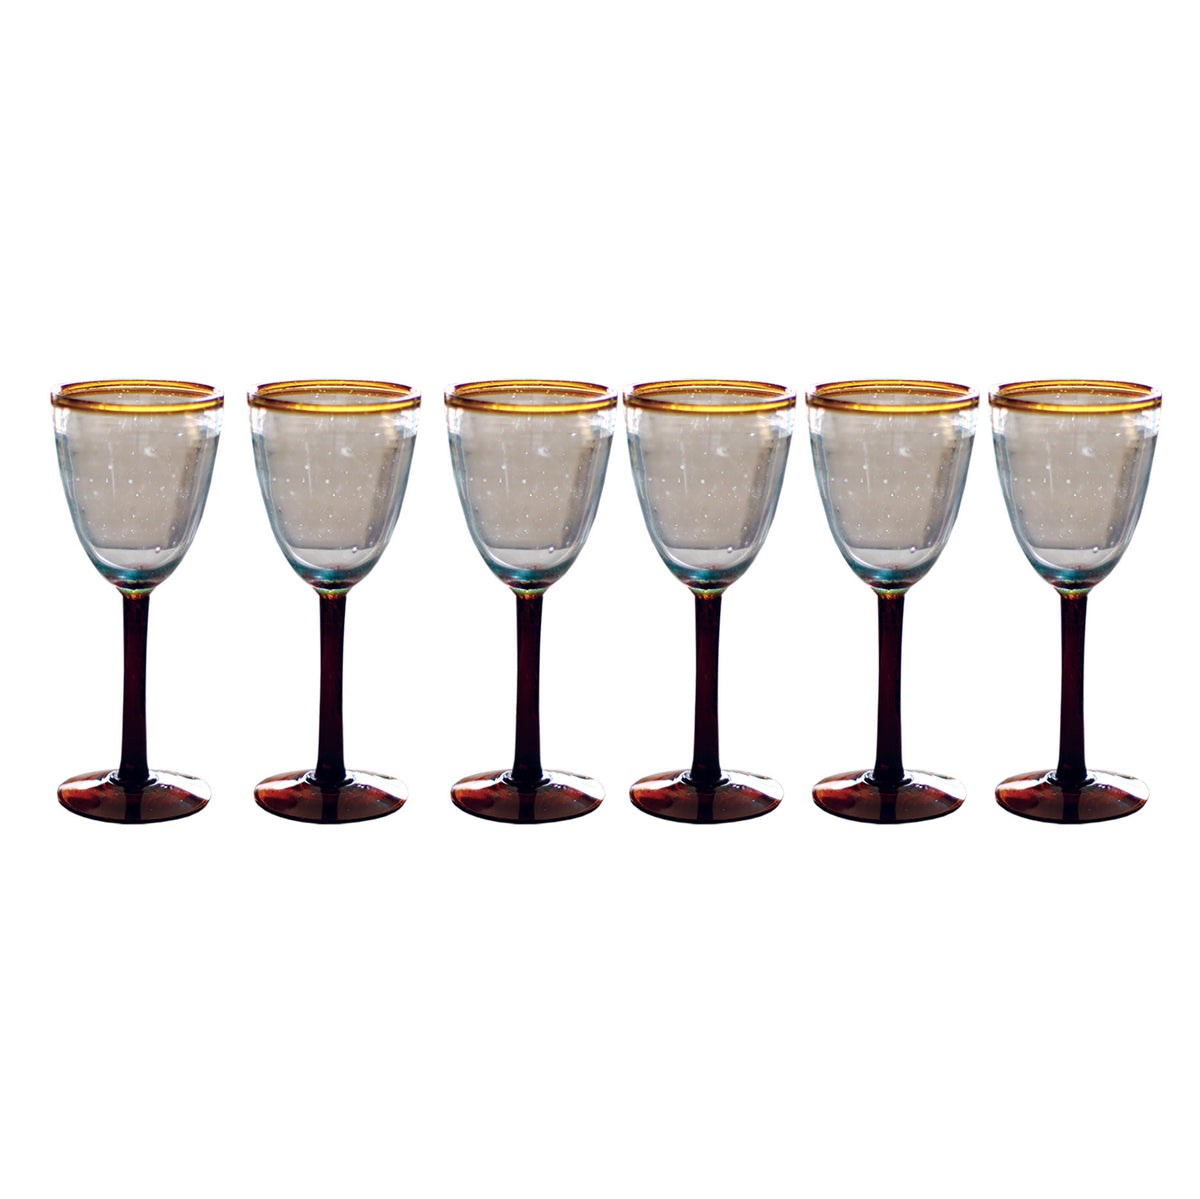 https://cdn.shopify.com/s/files/1/0010/0852/products/White_Set_of_Six_Wine_Glasses_With_Amber_Rim_1200x1200.jpg?v=1571436293